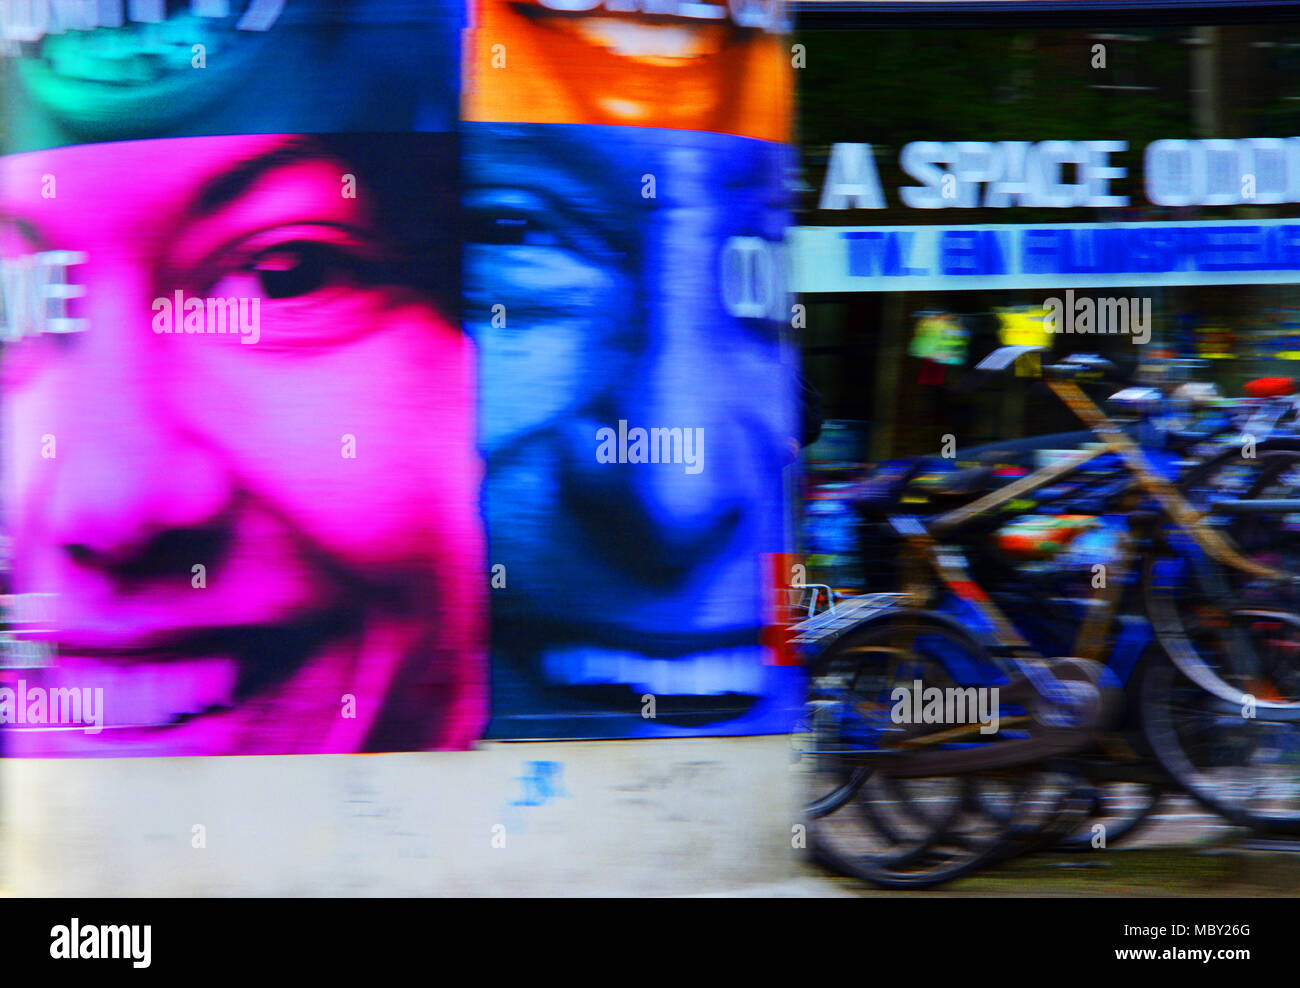 Abstract street scene depicting posters of a man and a woman laughing and smiling adjusted to crimson and blue for impact, Amsterdam, the Netherlands Stock Photo